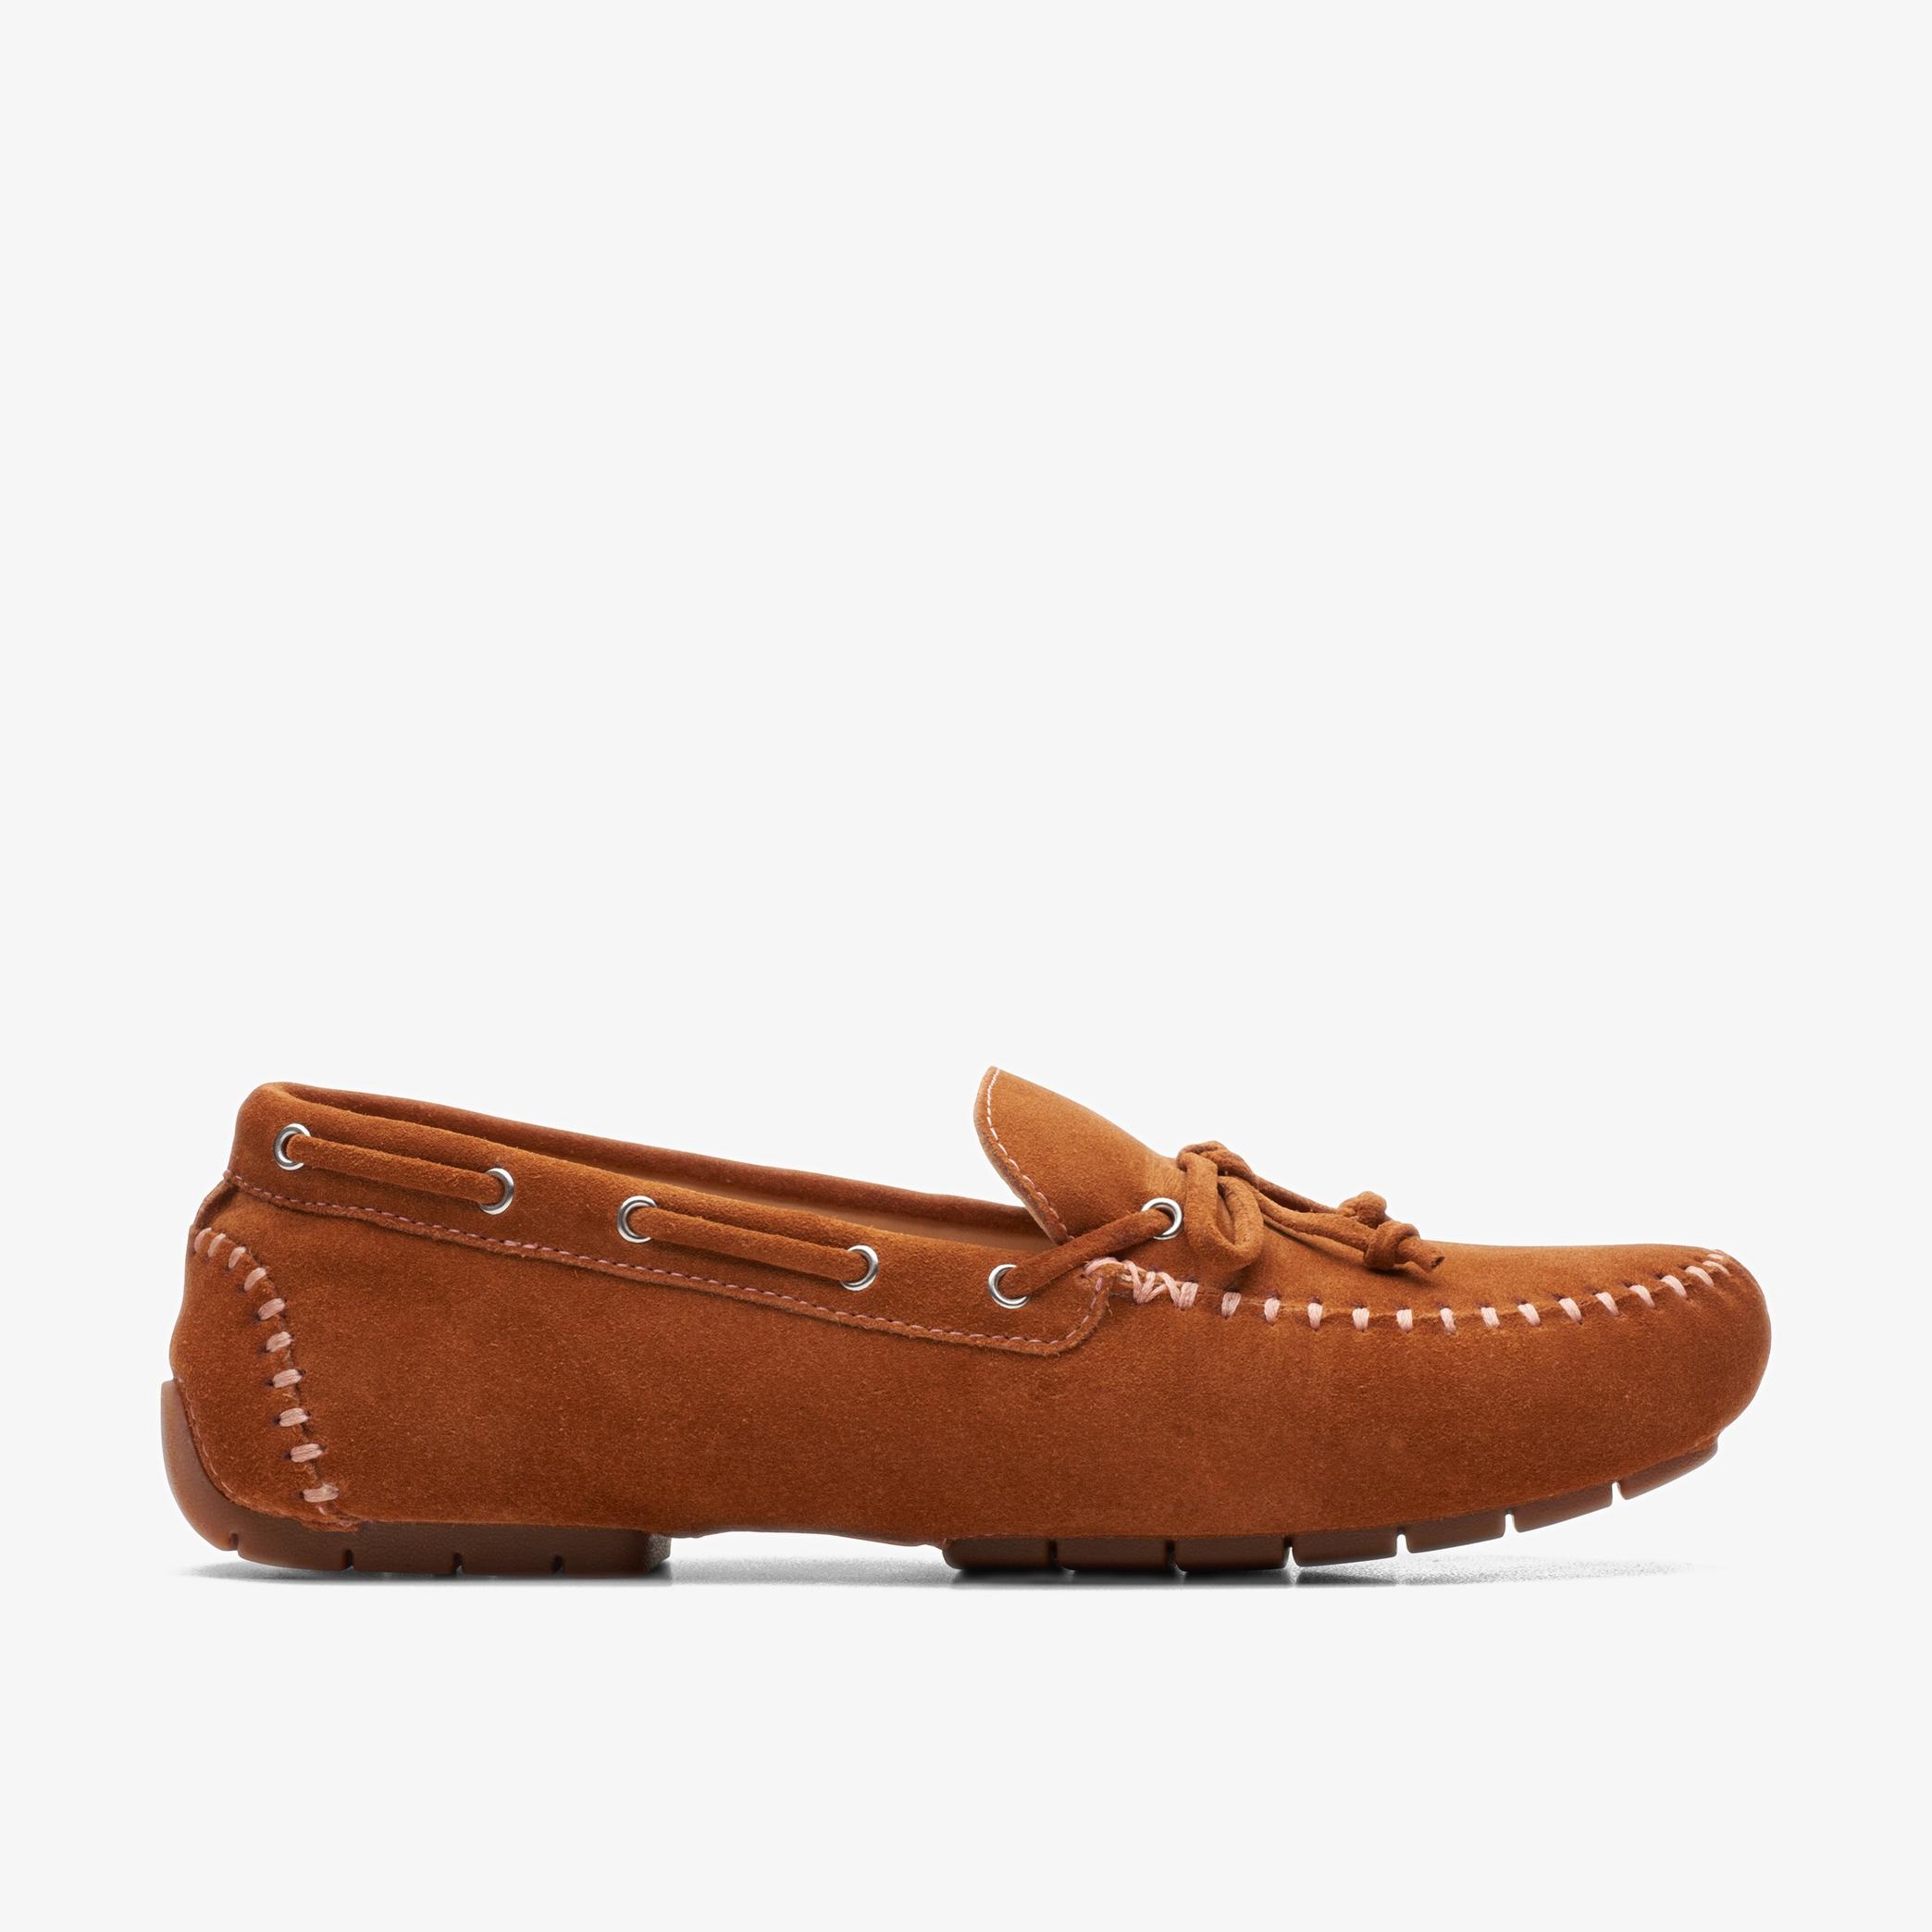 C Mocc Tie Tan Suede Loafers, view 1 of 6